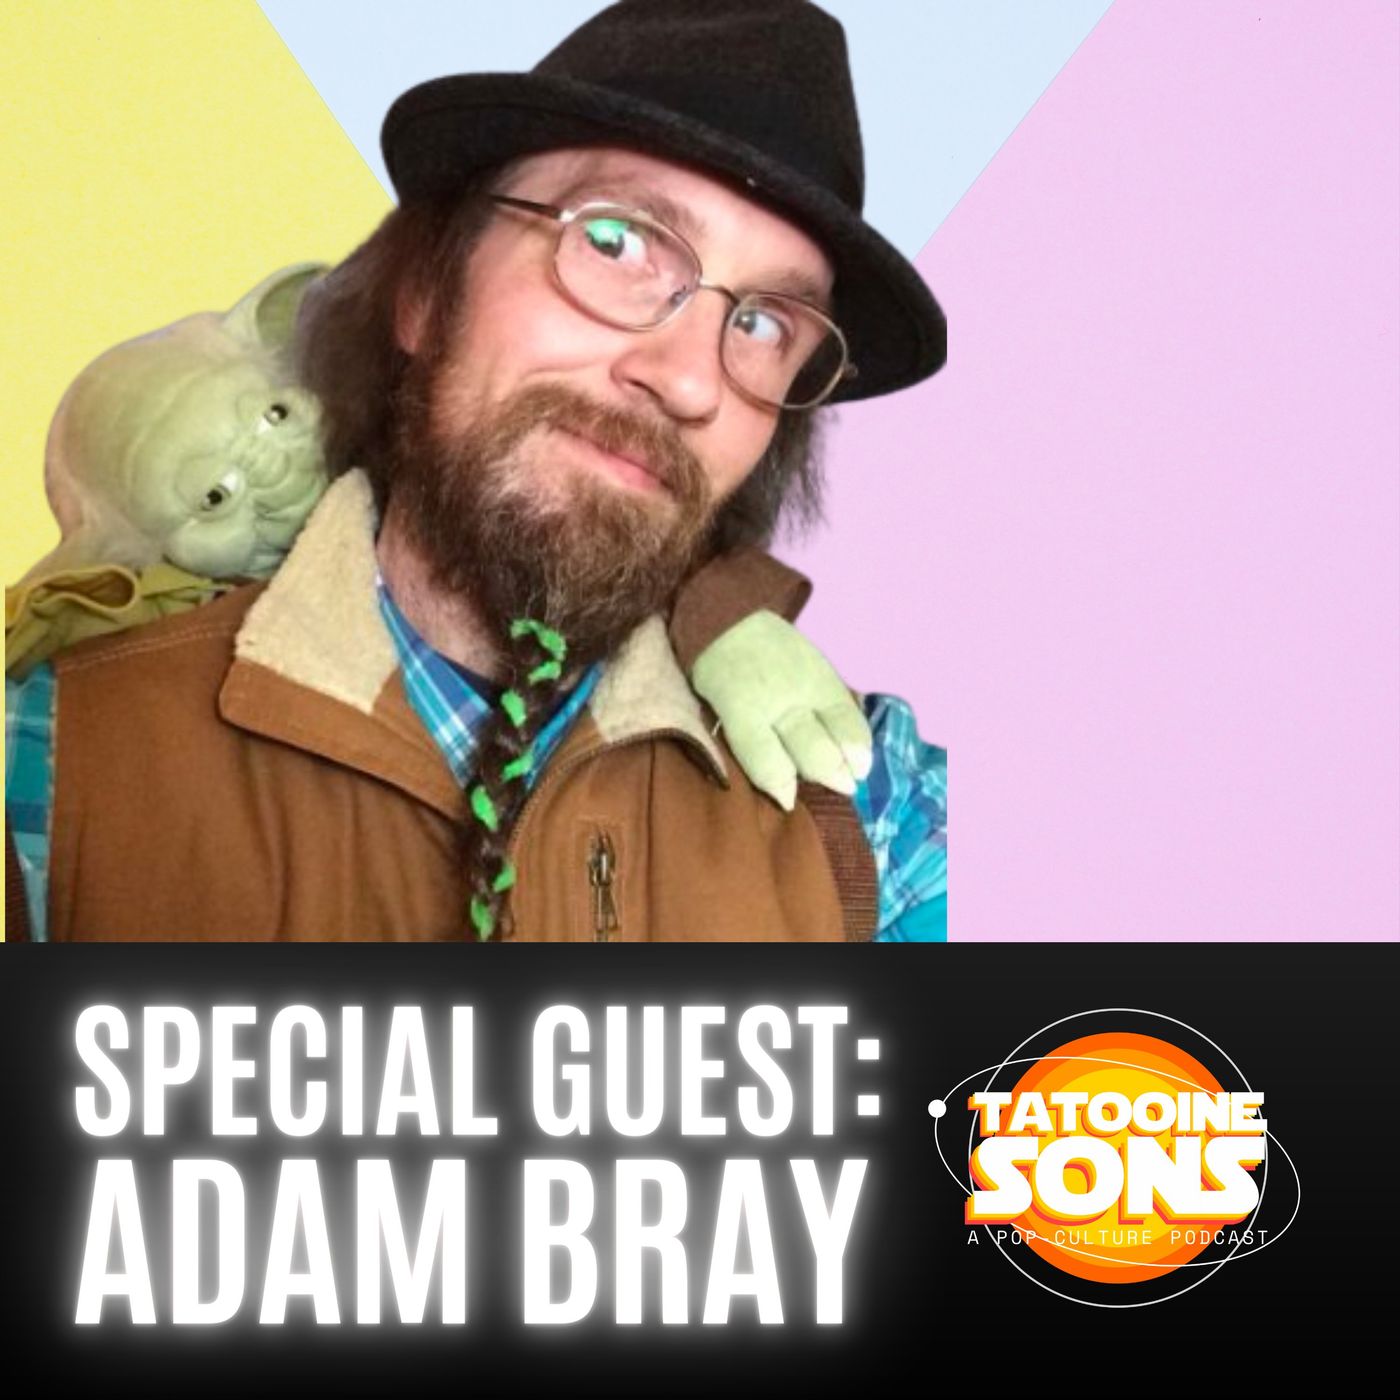 The Most Interesting Man in the Nerdery: The Adam Bray Interview